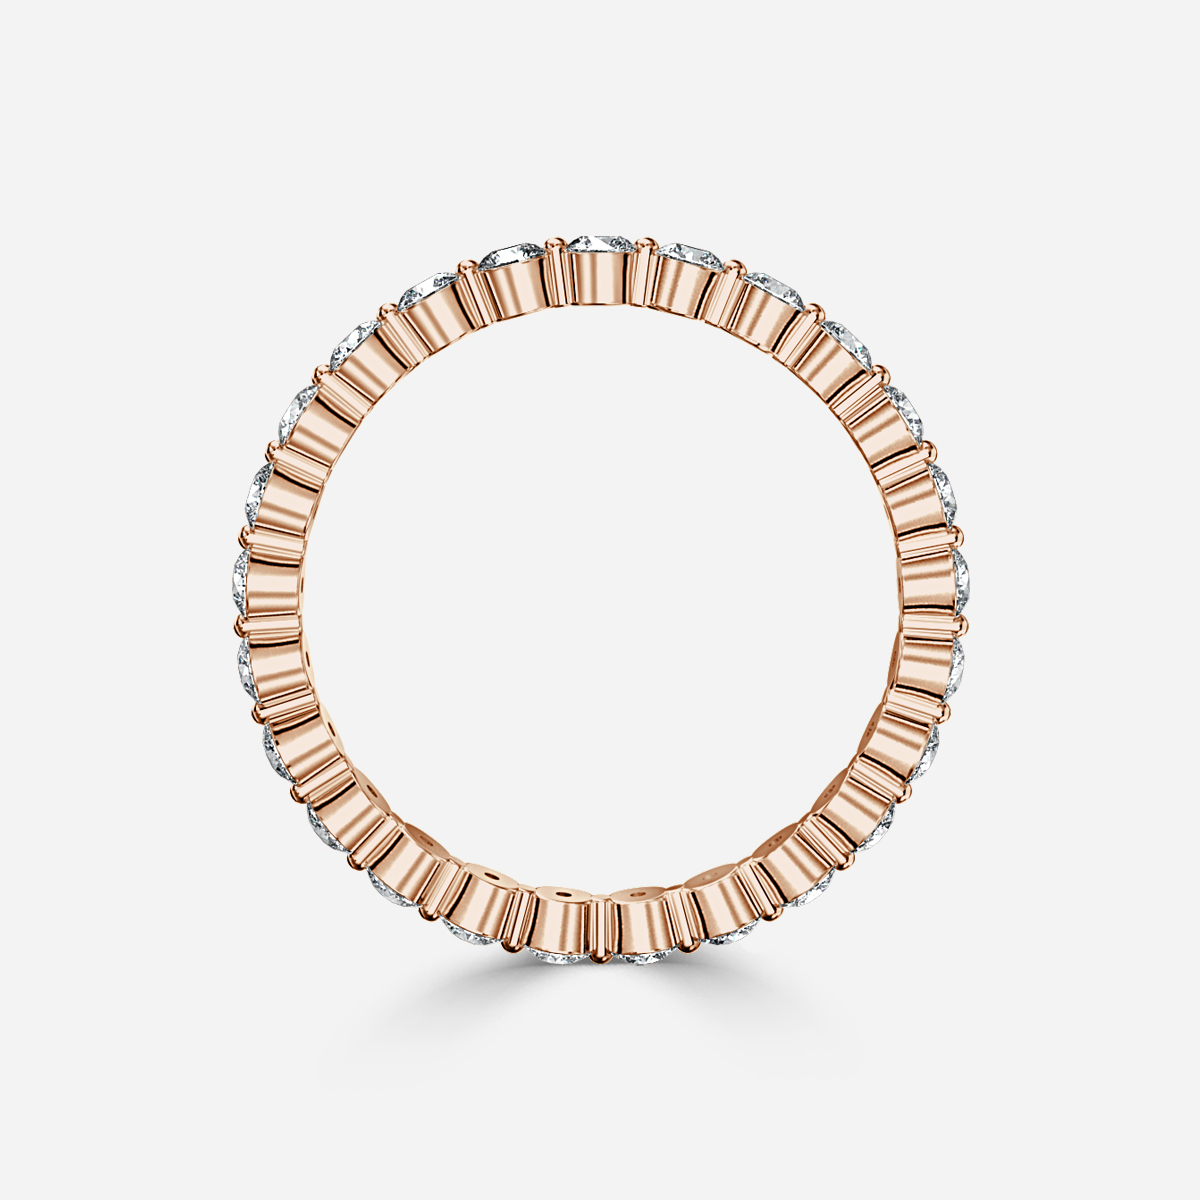 Single Shared Claw Eternity Ring In Rose Gold